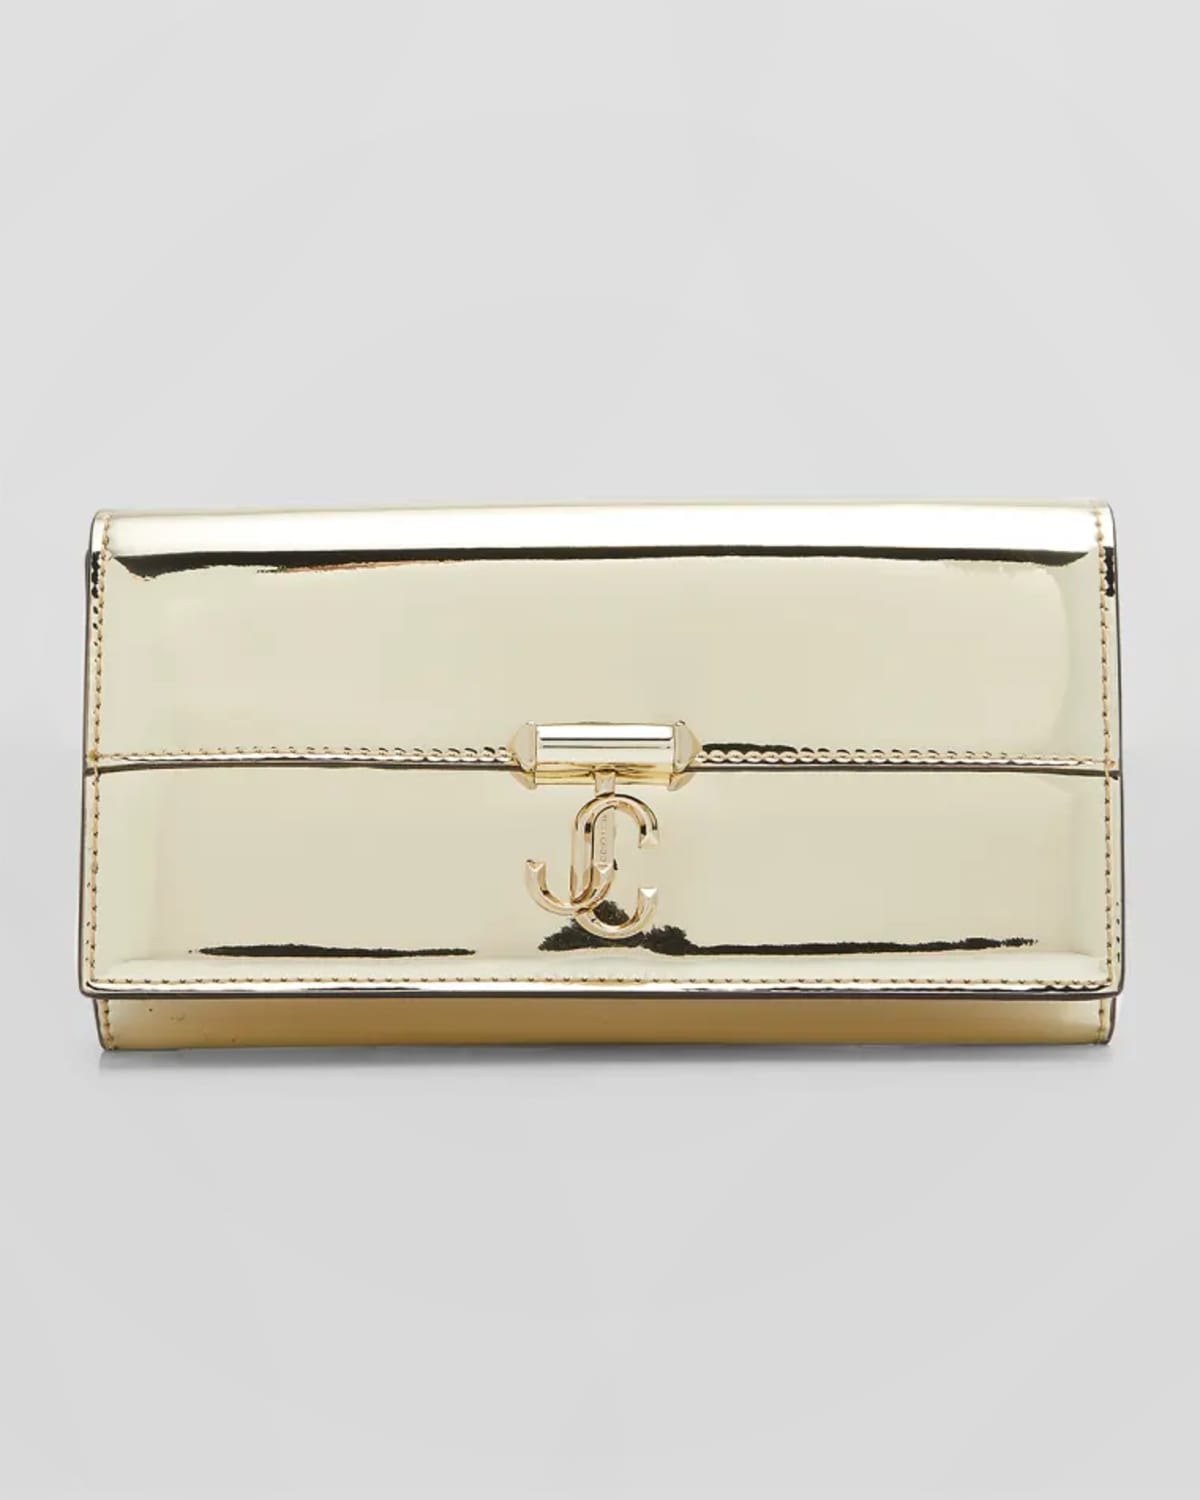 Varenne Metallic Patent Wallet with Chain Strap